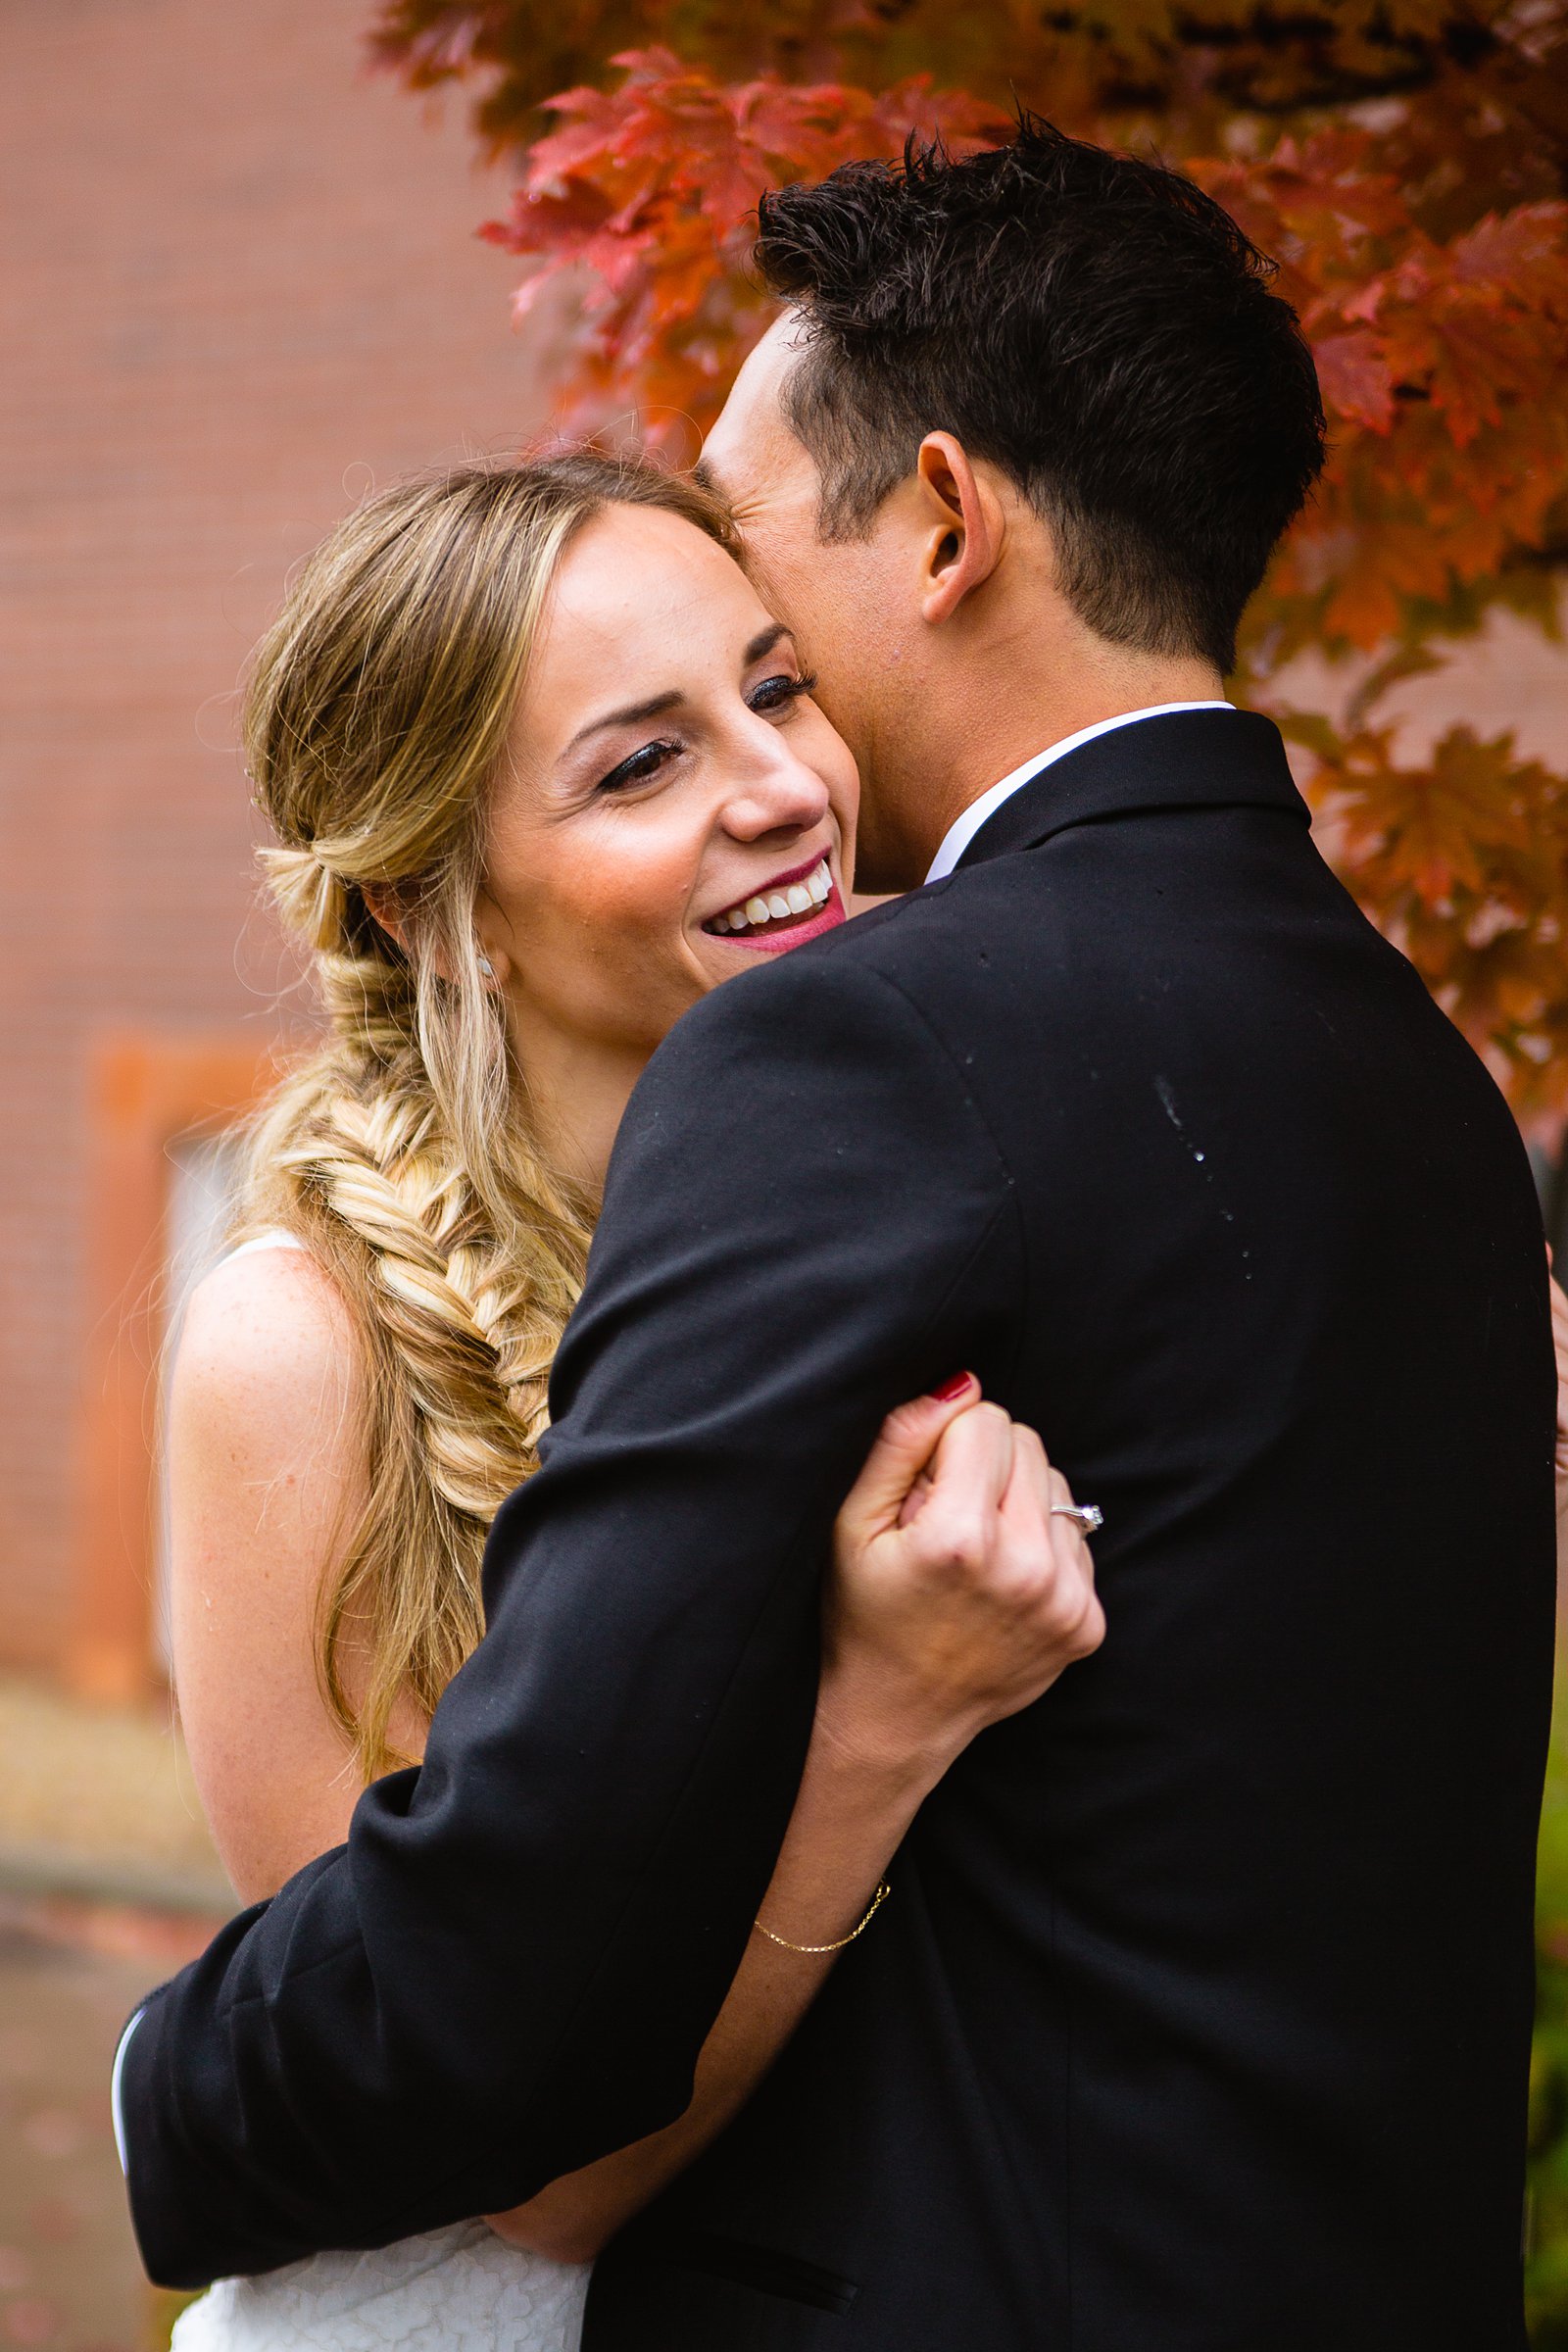 Bride and groom share an intimate moment during their downtown Flagstaff wedding by Flagstaff wedding photographer PMA Photography.